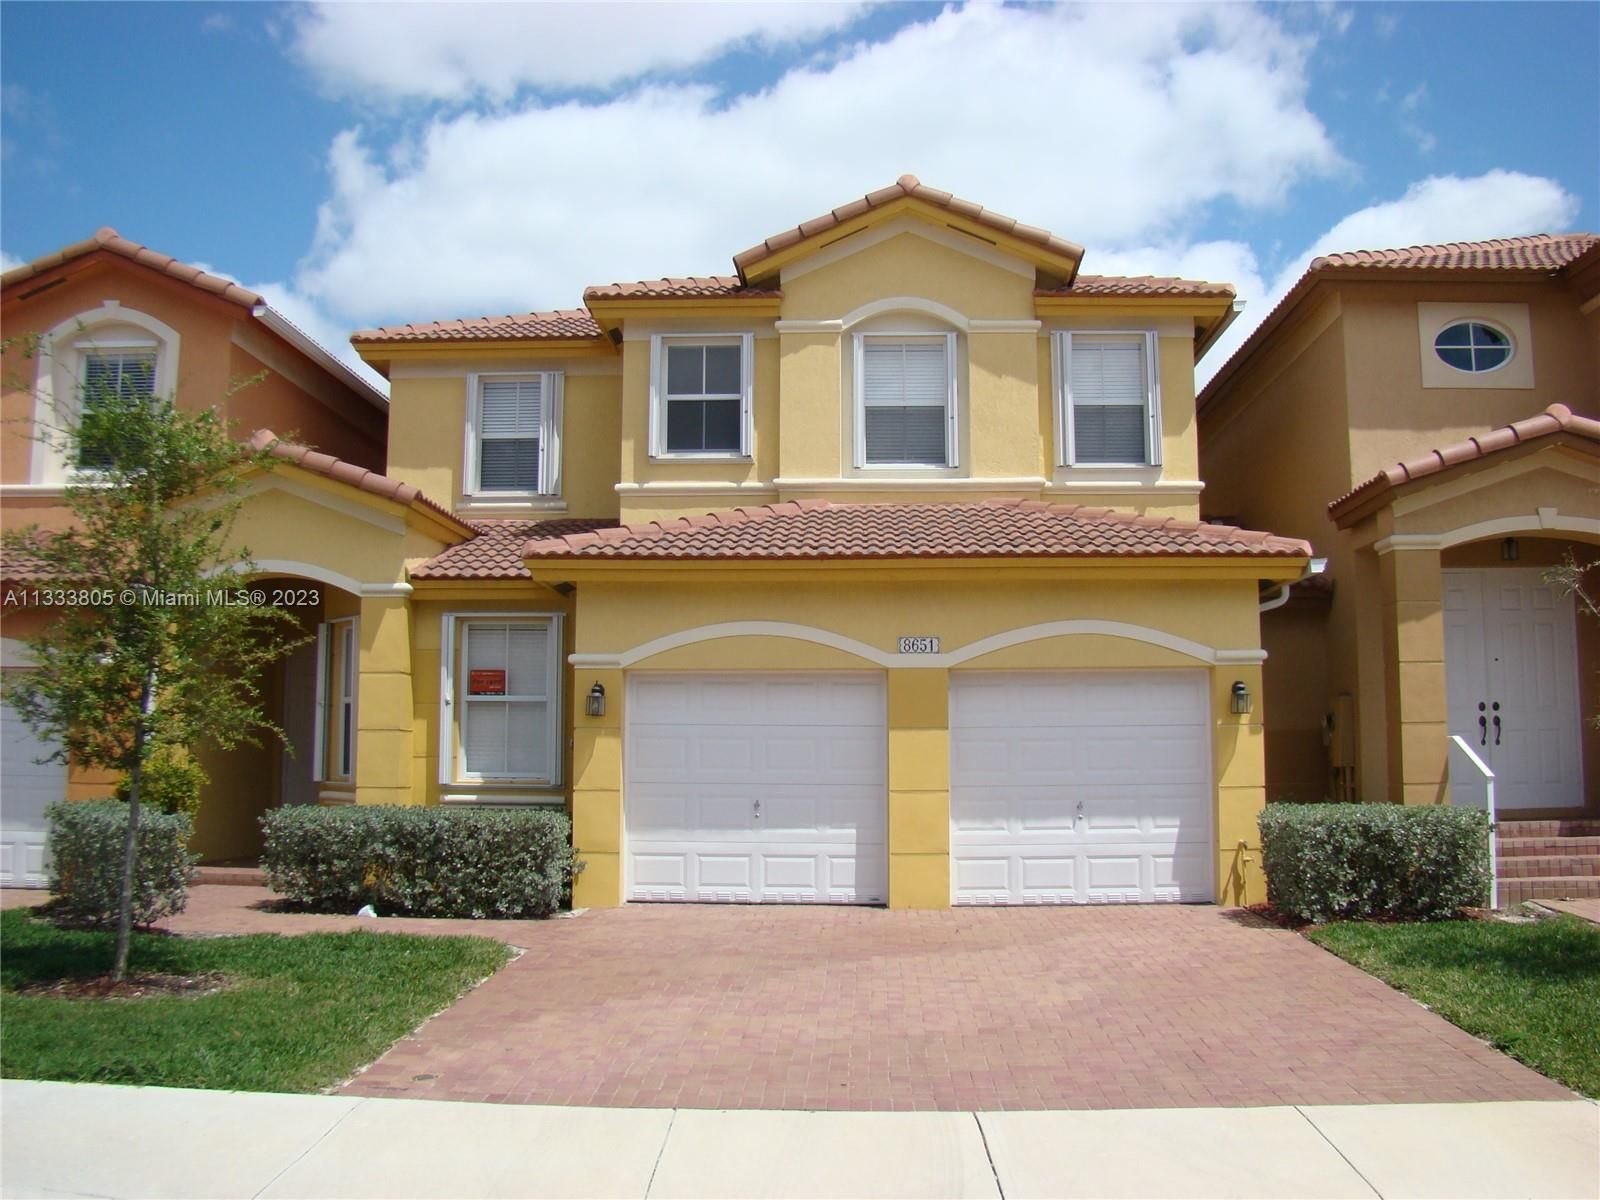 Real estate property located at 8651 111th Ct ., Miami-Dade County, Doral, FL